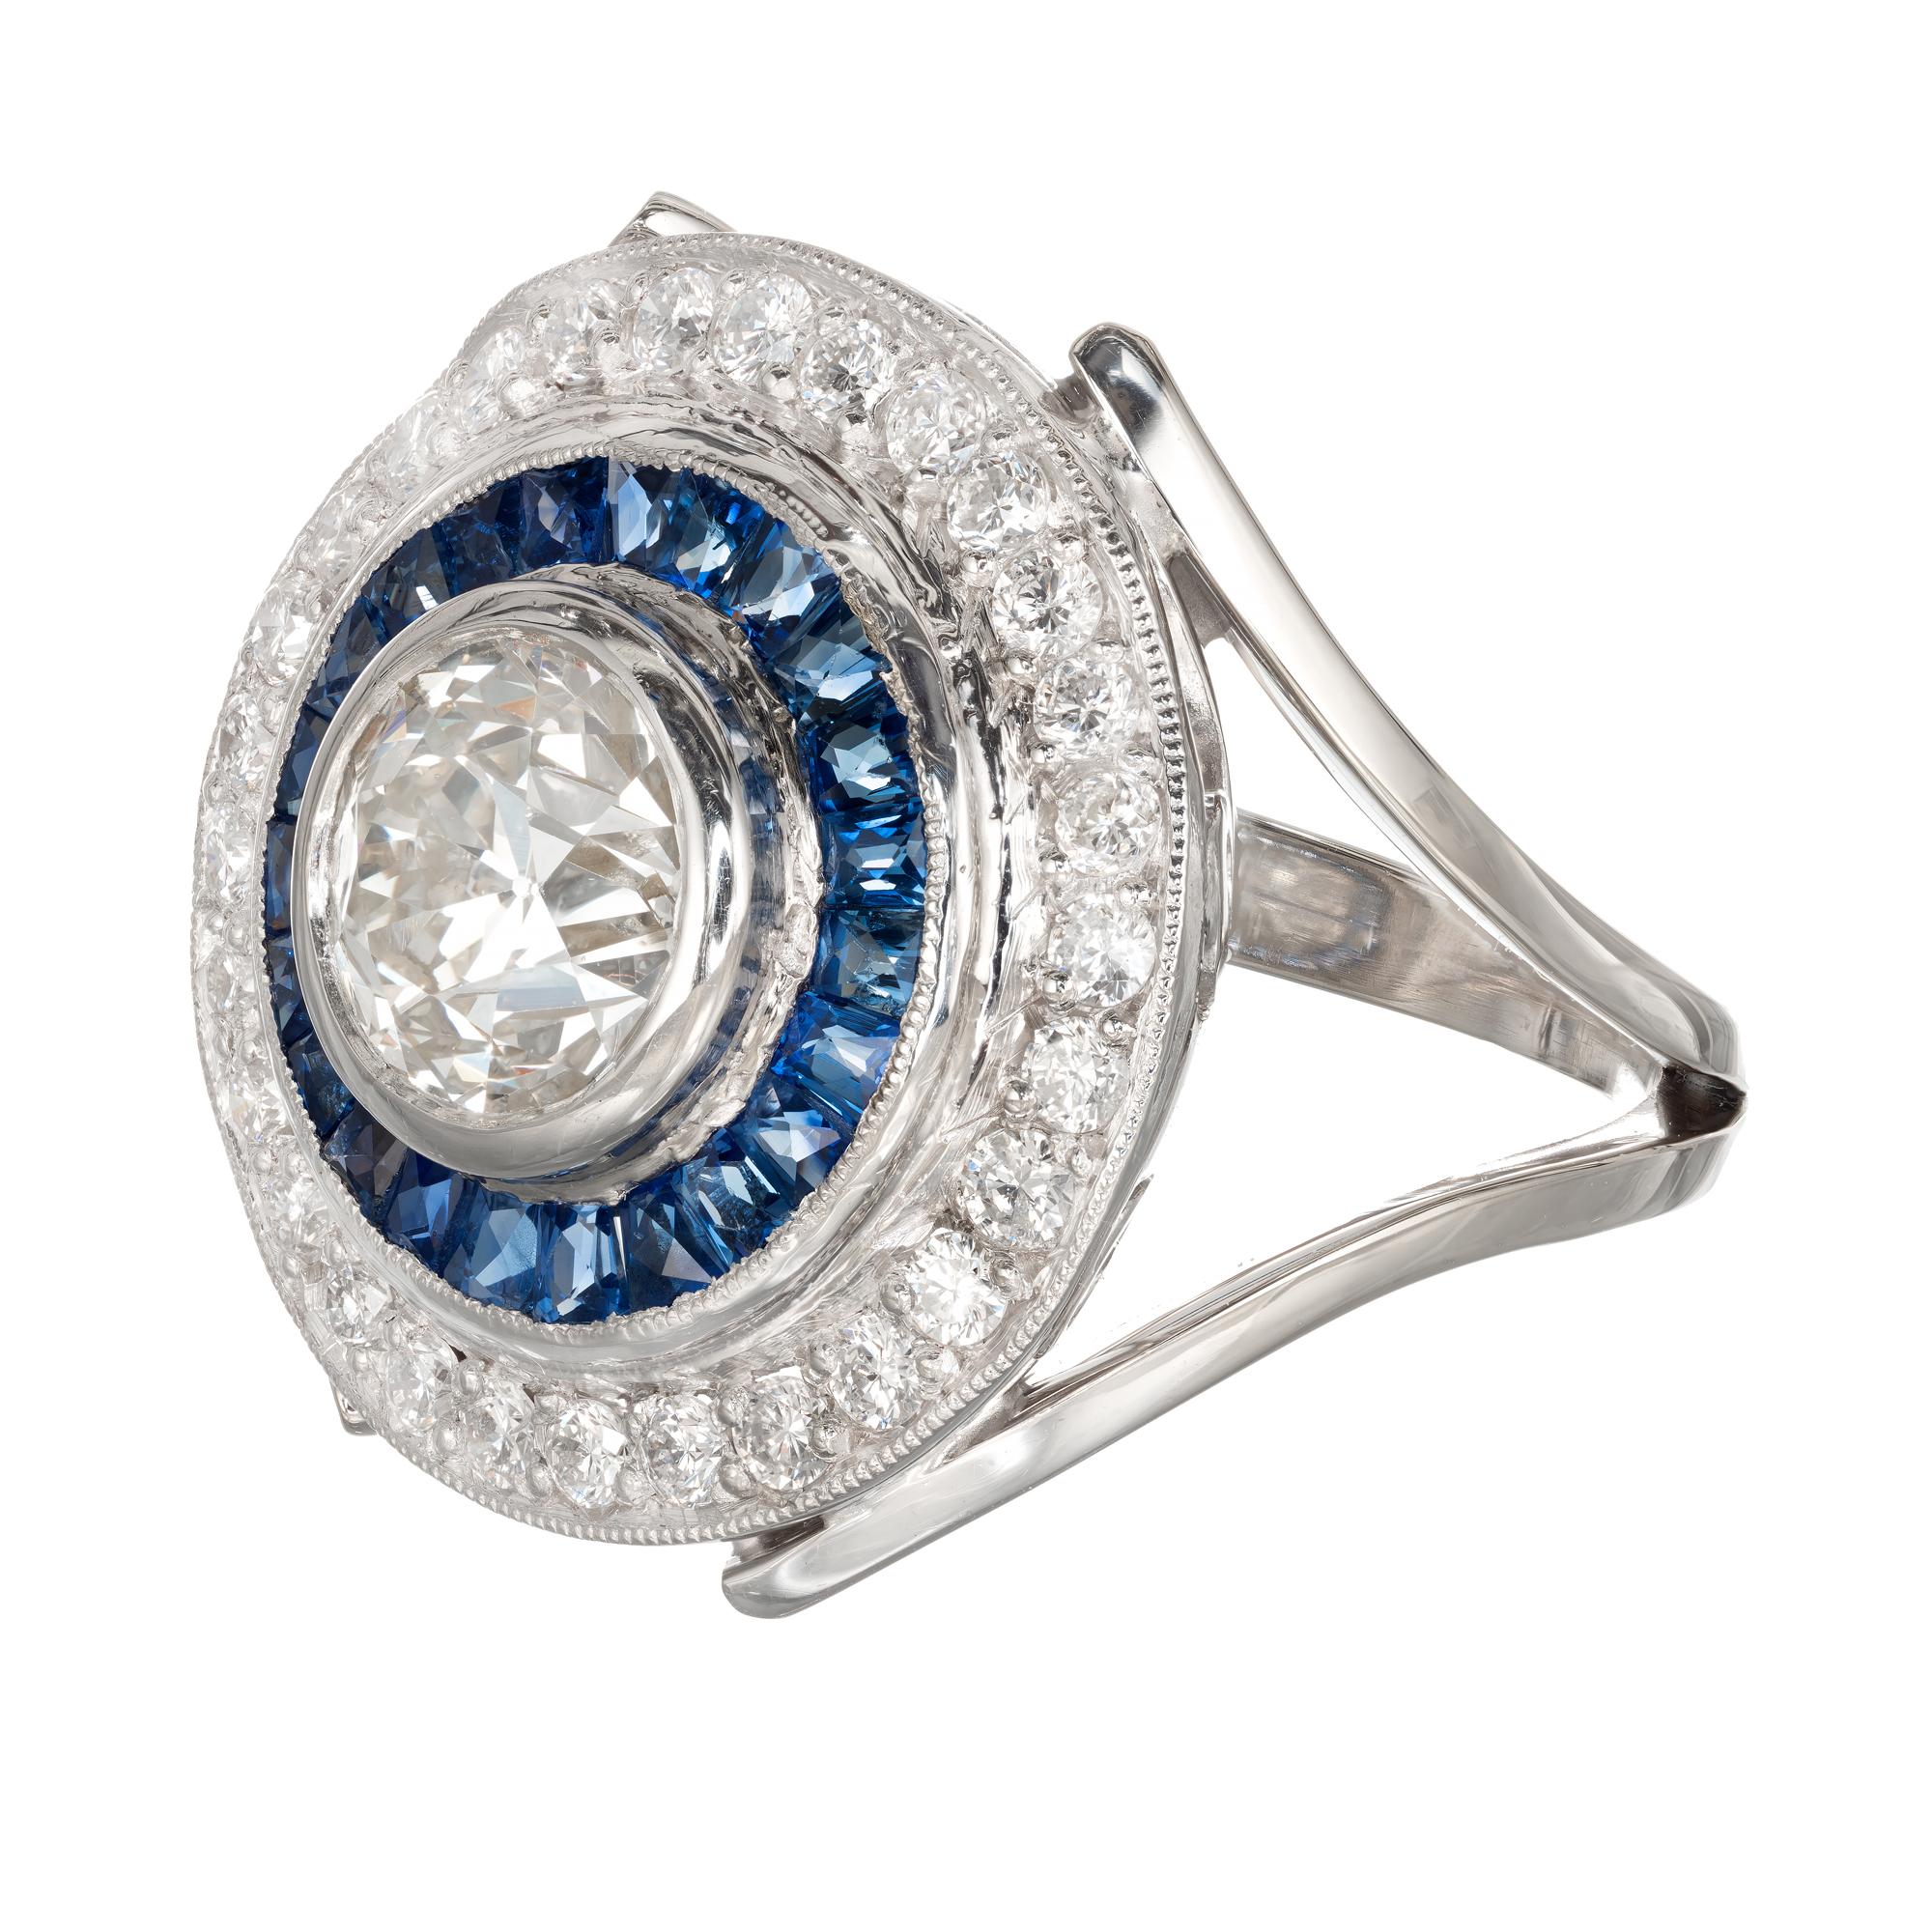 Diamond and sapphire halo cocktail ring. European brilliant cut center stone in a platinum and 18k white gold setting with a halo of calibre French cut sapphires and a halo of round full cut diamonds EGL certified. Created in the Peter Suchy